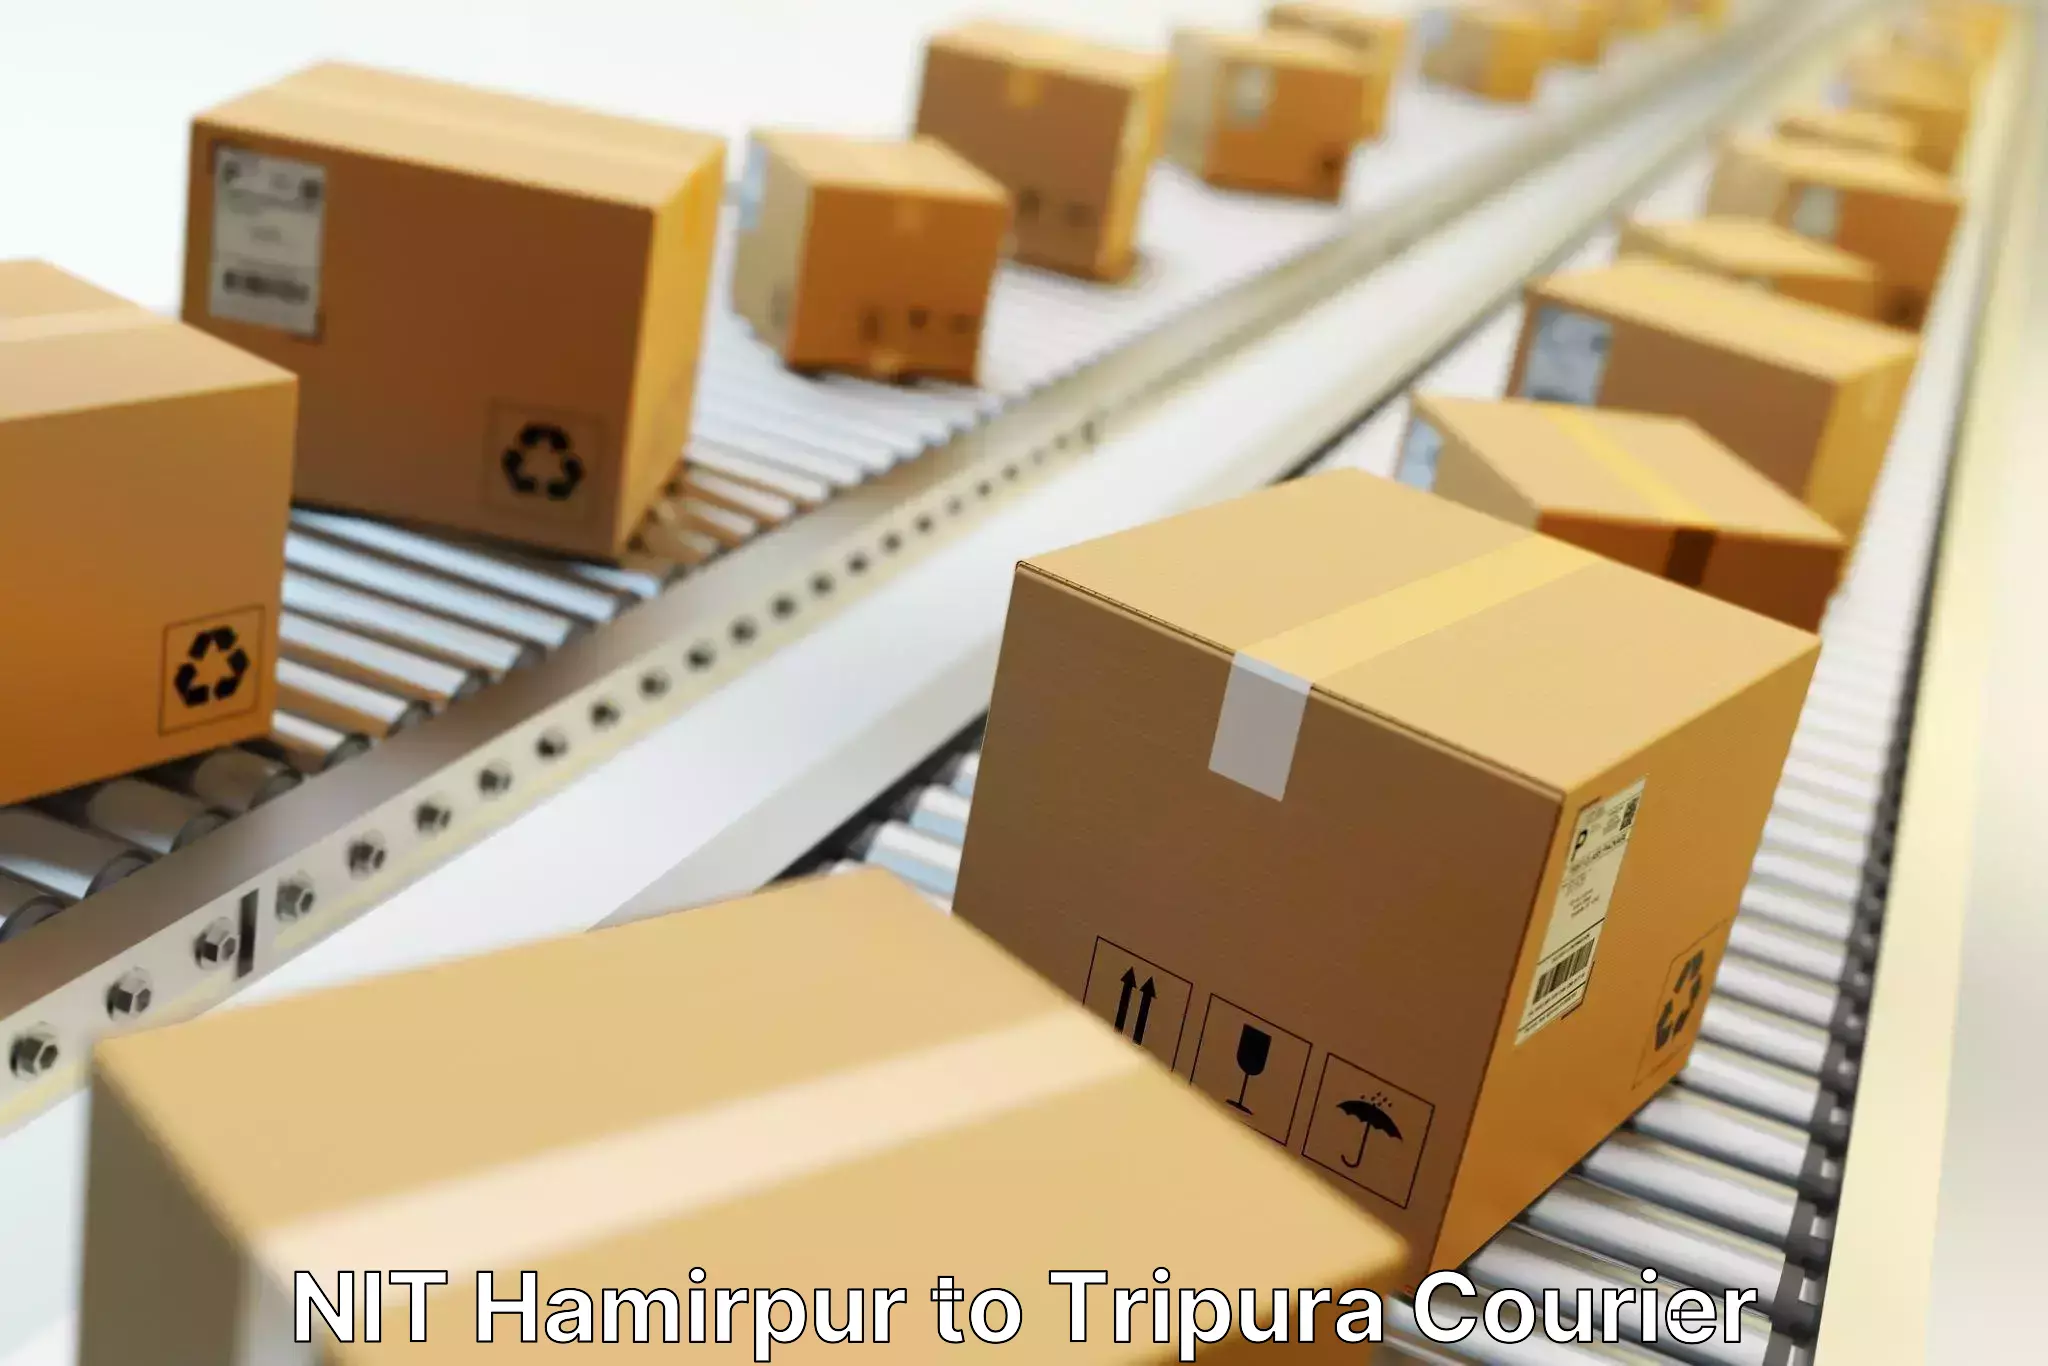 Round-the-clock parcel delivery NIT Hamirpur to Dharmanagar